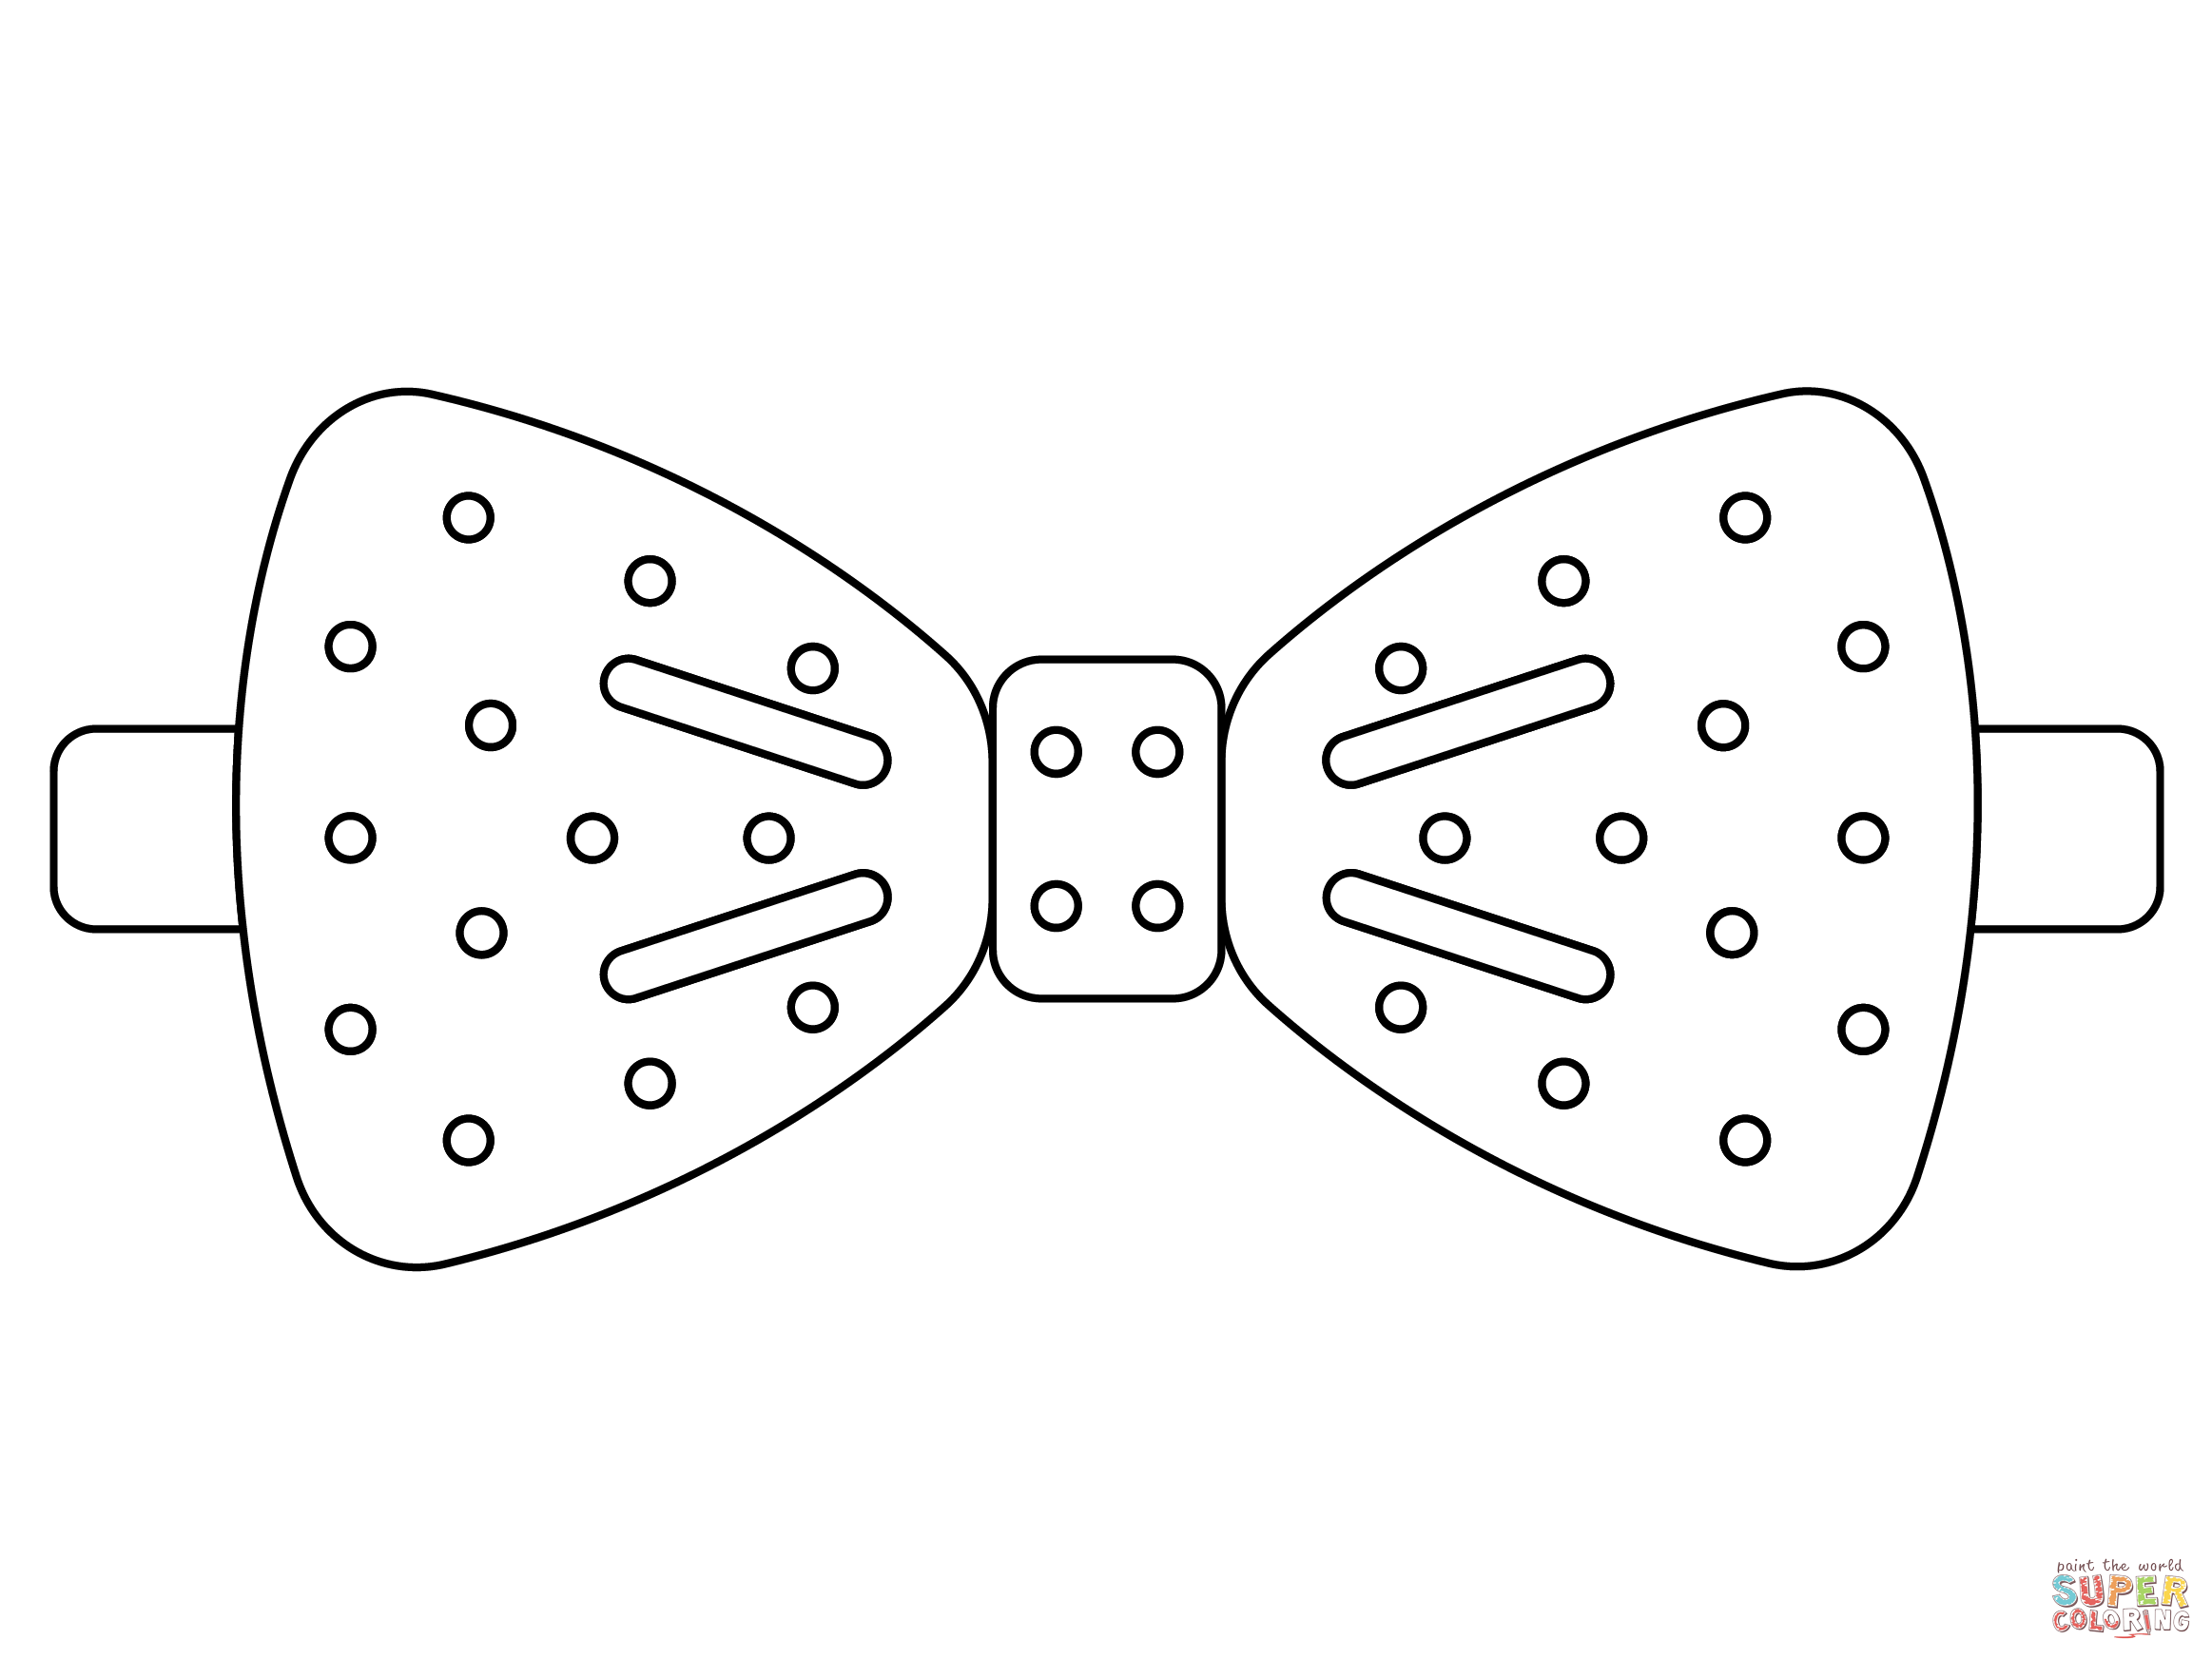 Bowtie coloring page free printable coloring pages